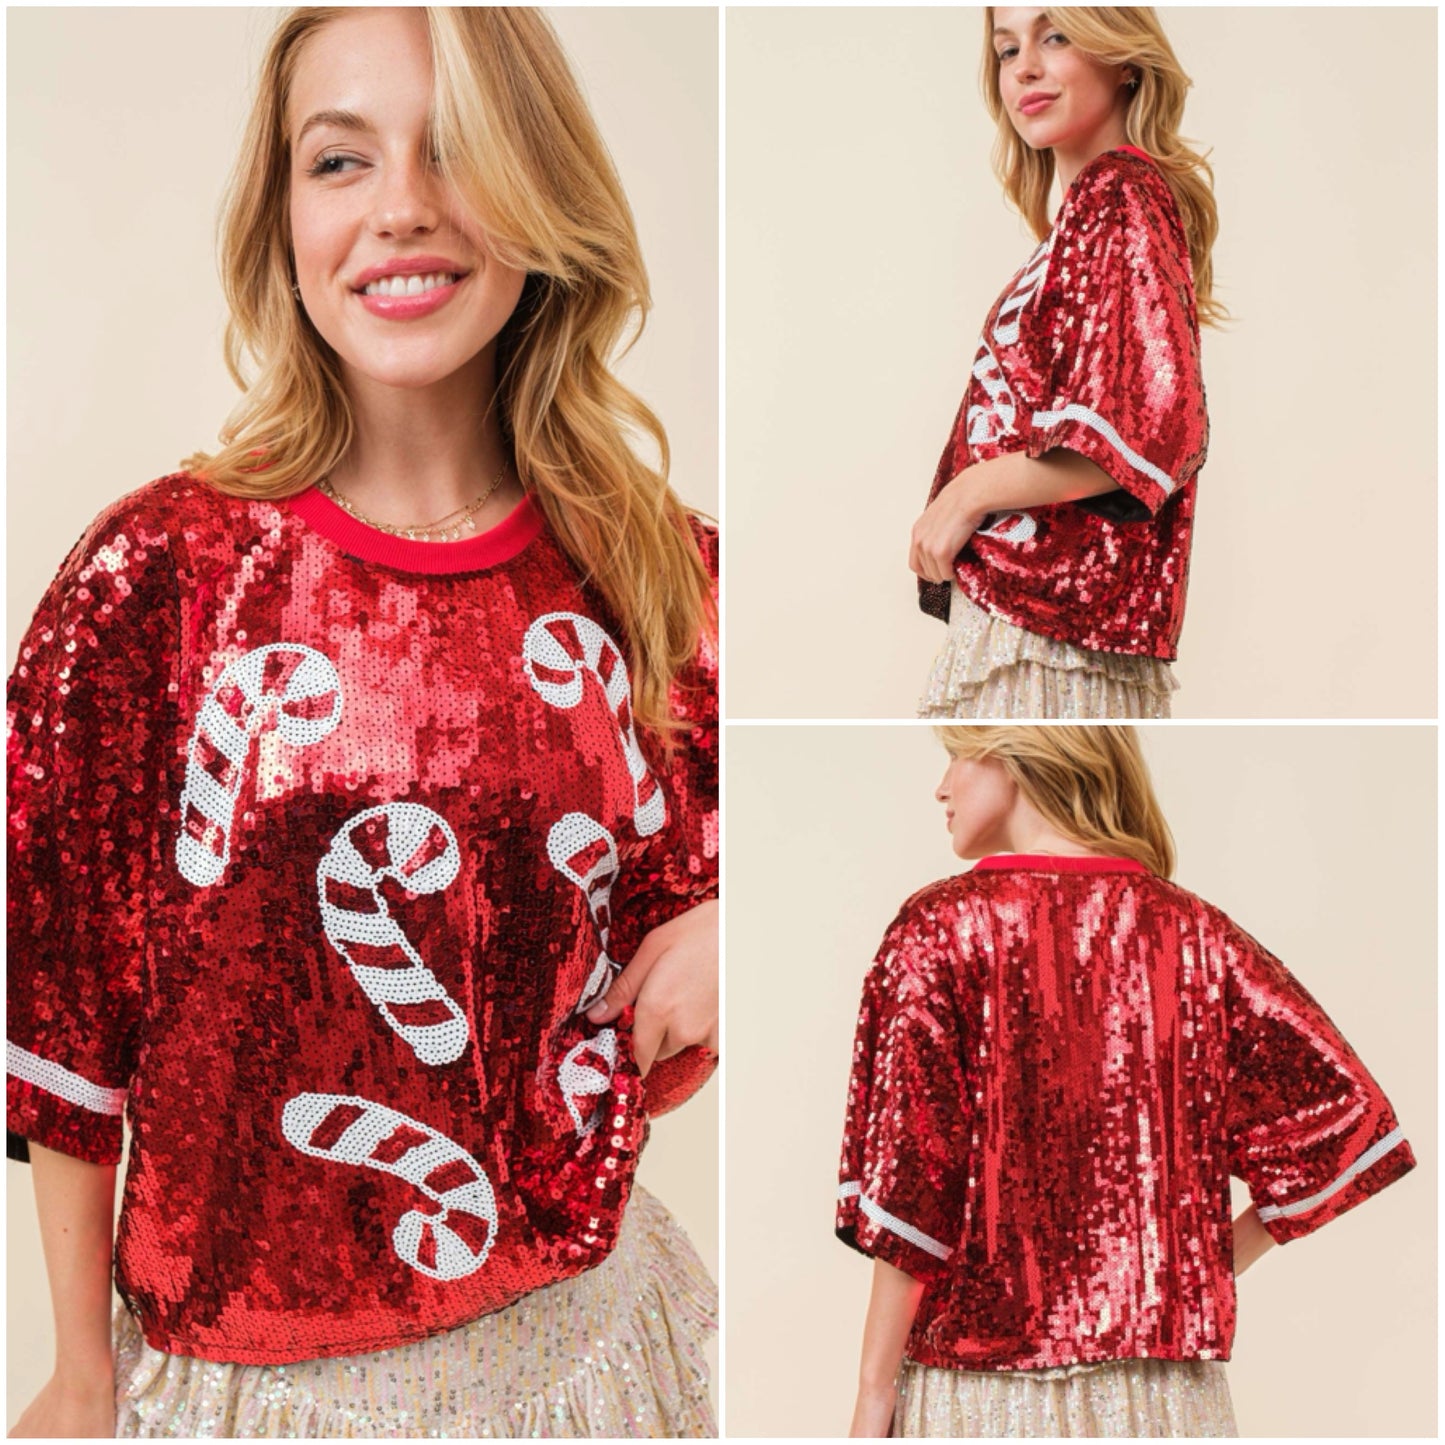 Candy Cane sequin top